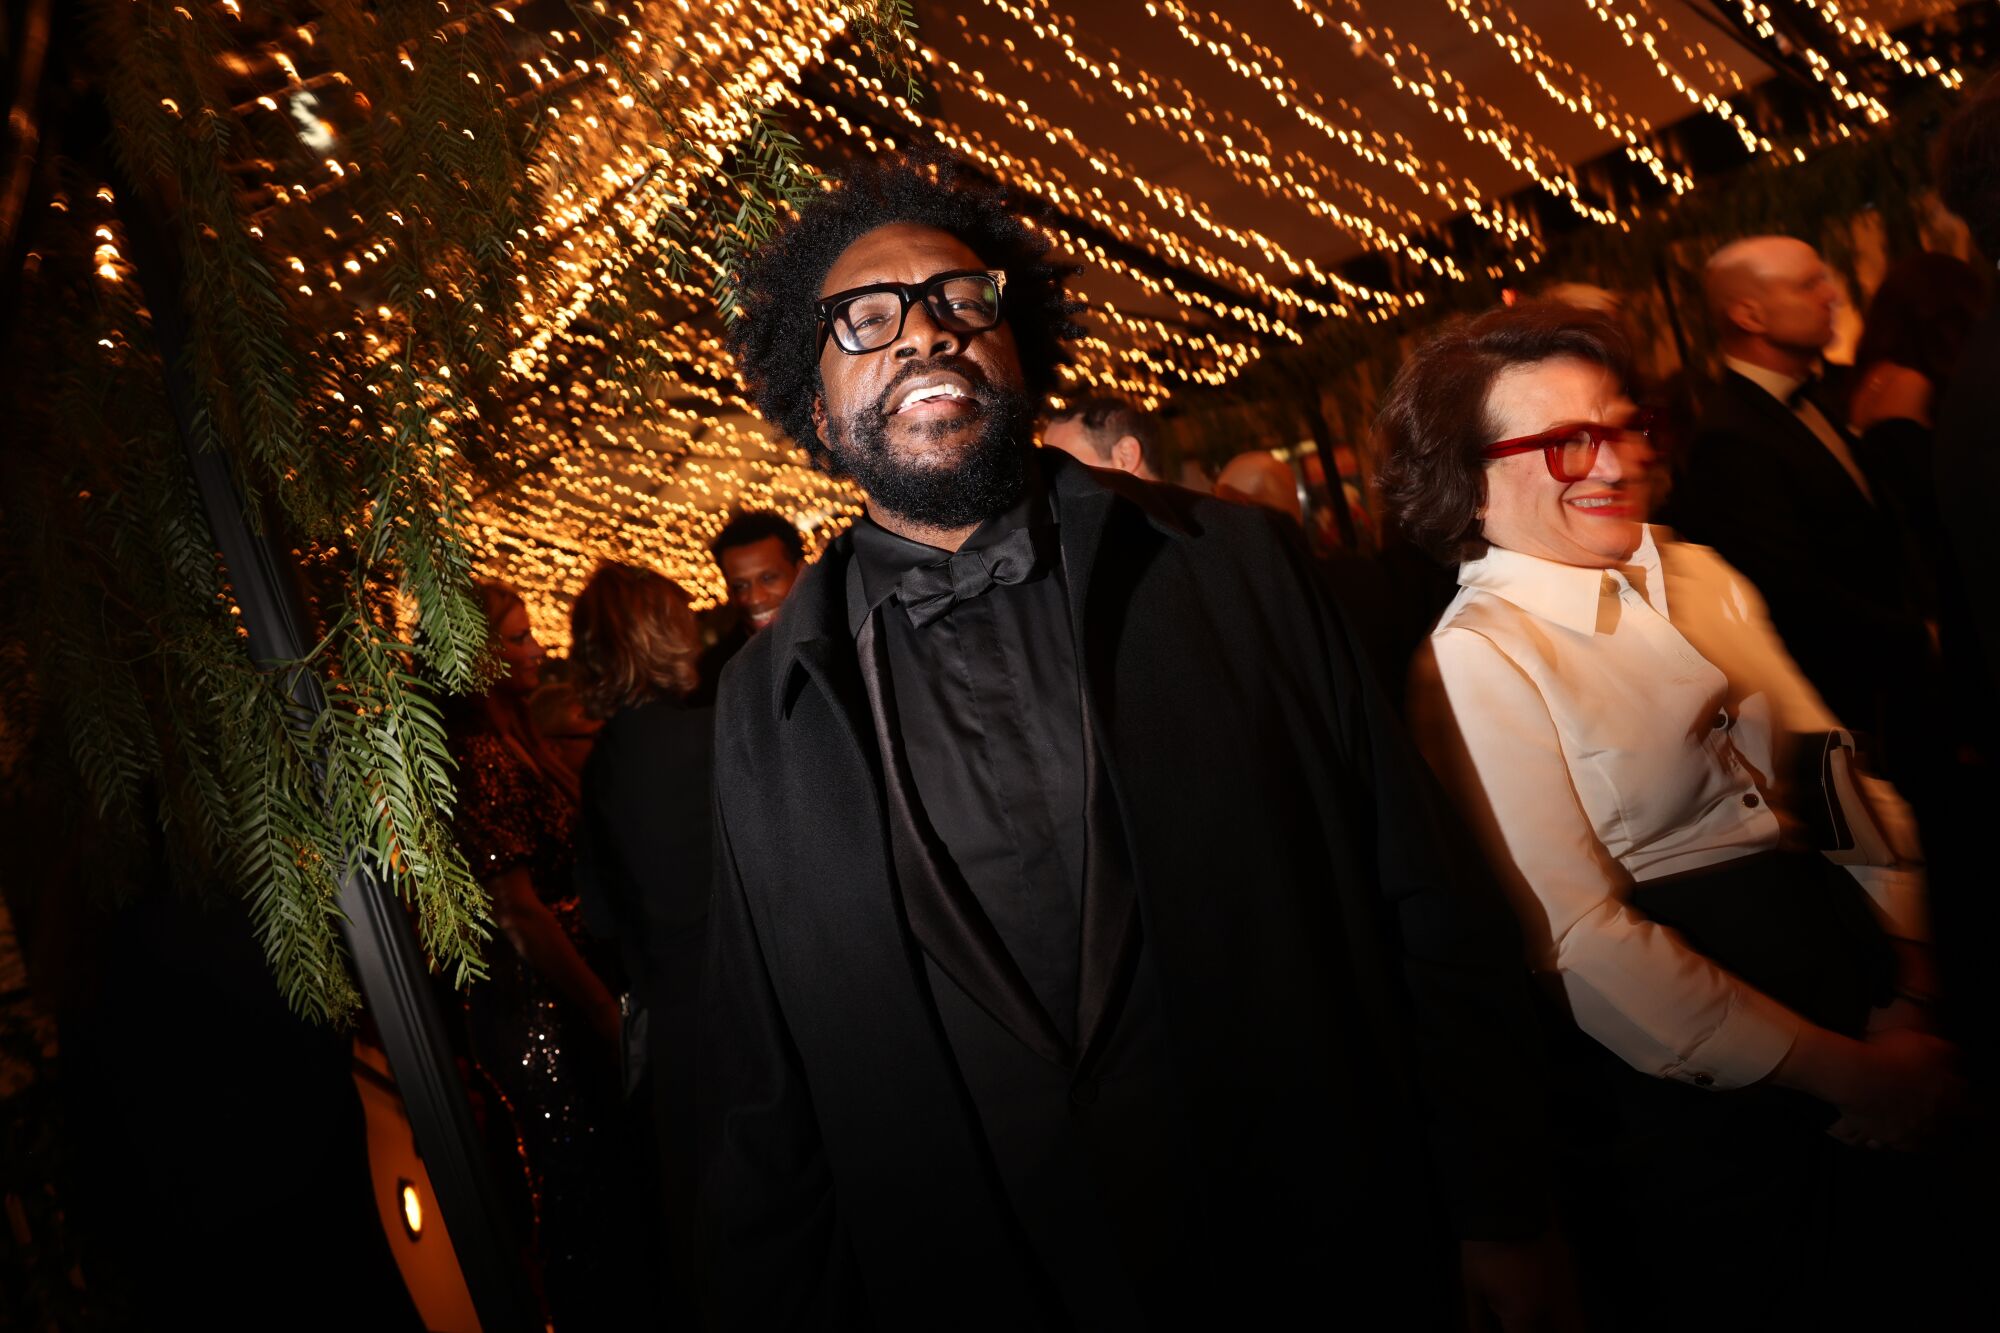 Questlove grins beneath strings of white lights.